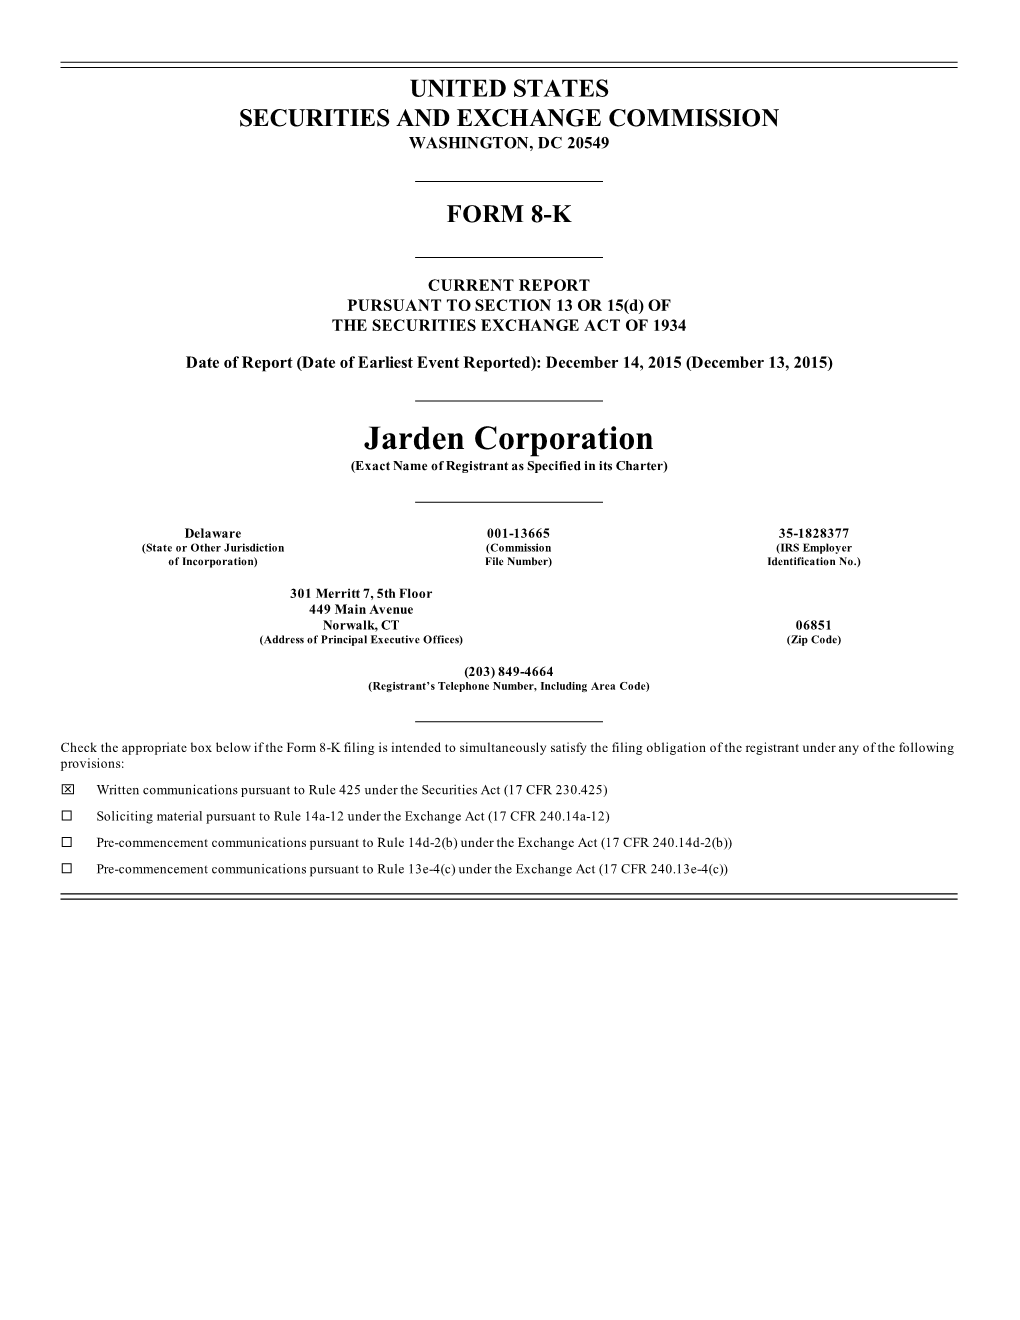 Jarden Corporation (Exact Name of Registrant As Specified in Its Charter)